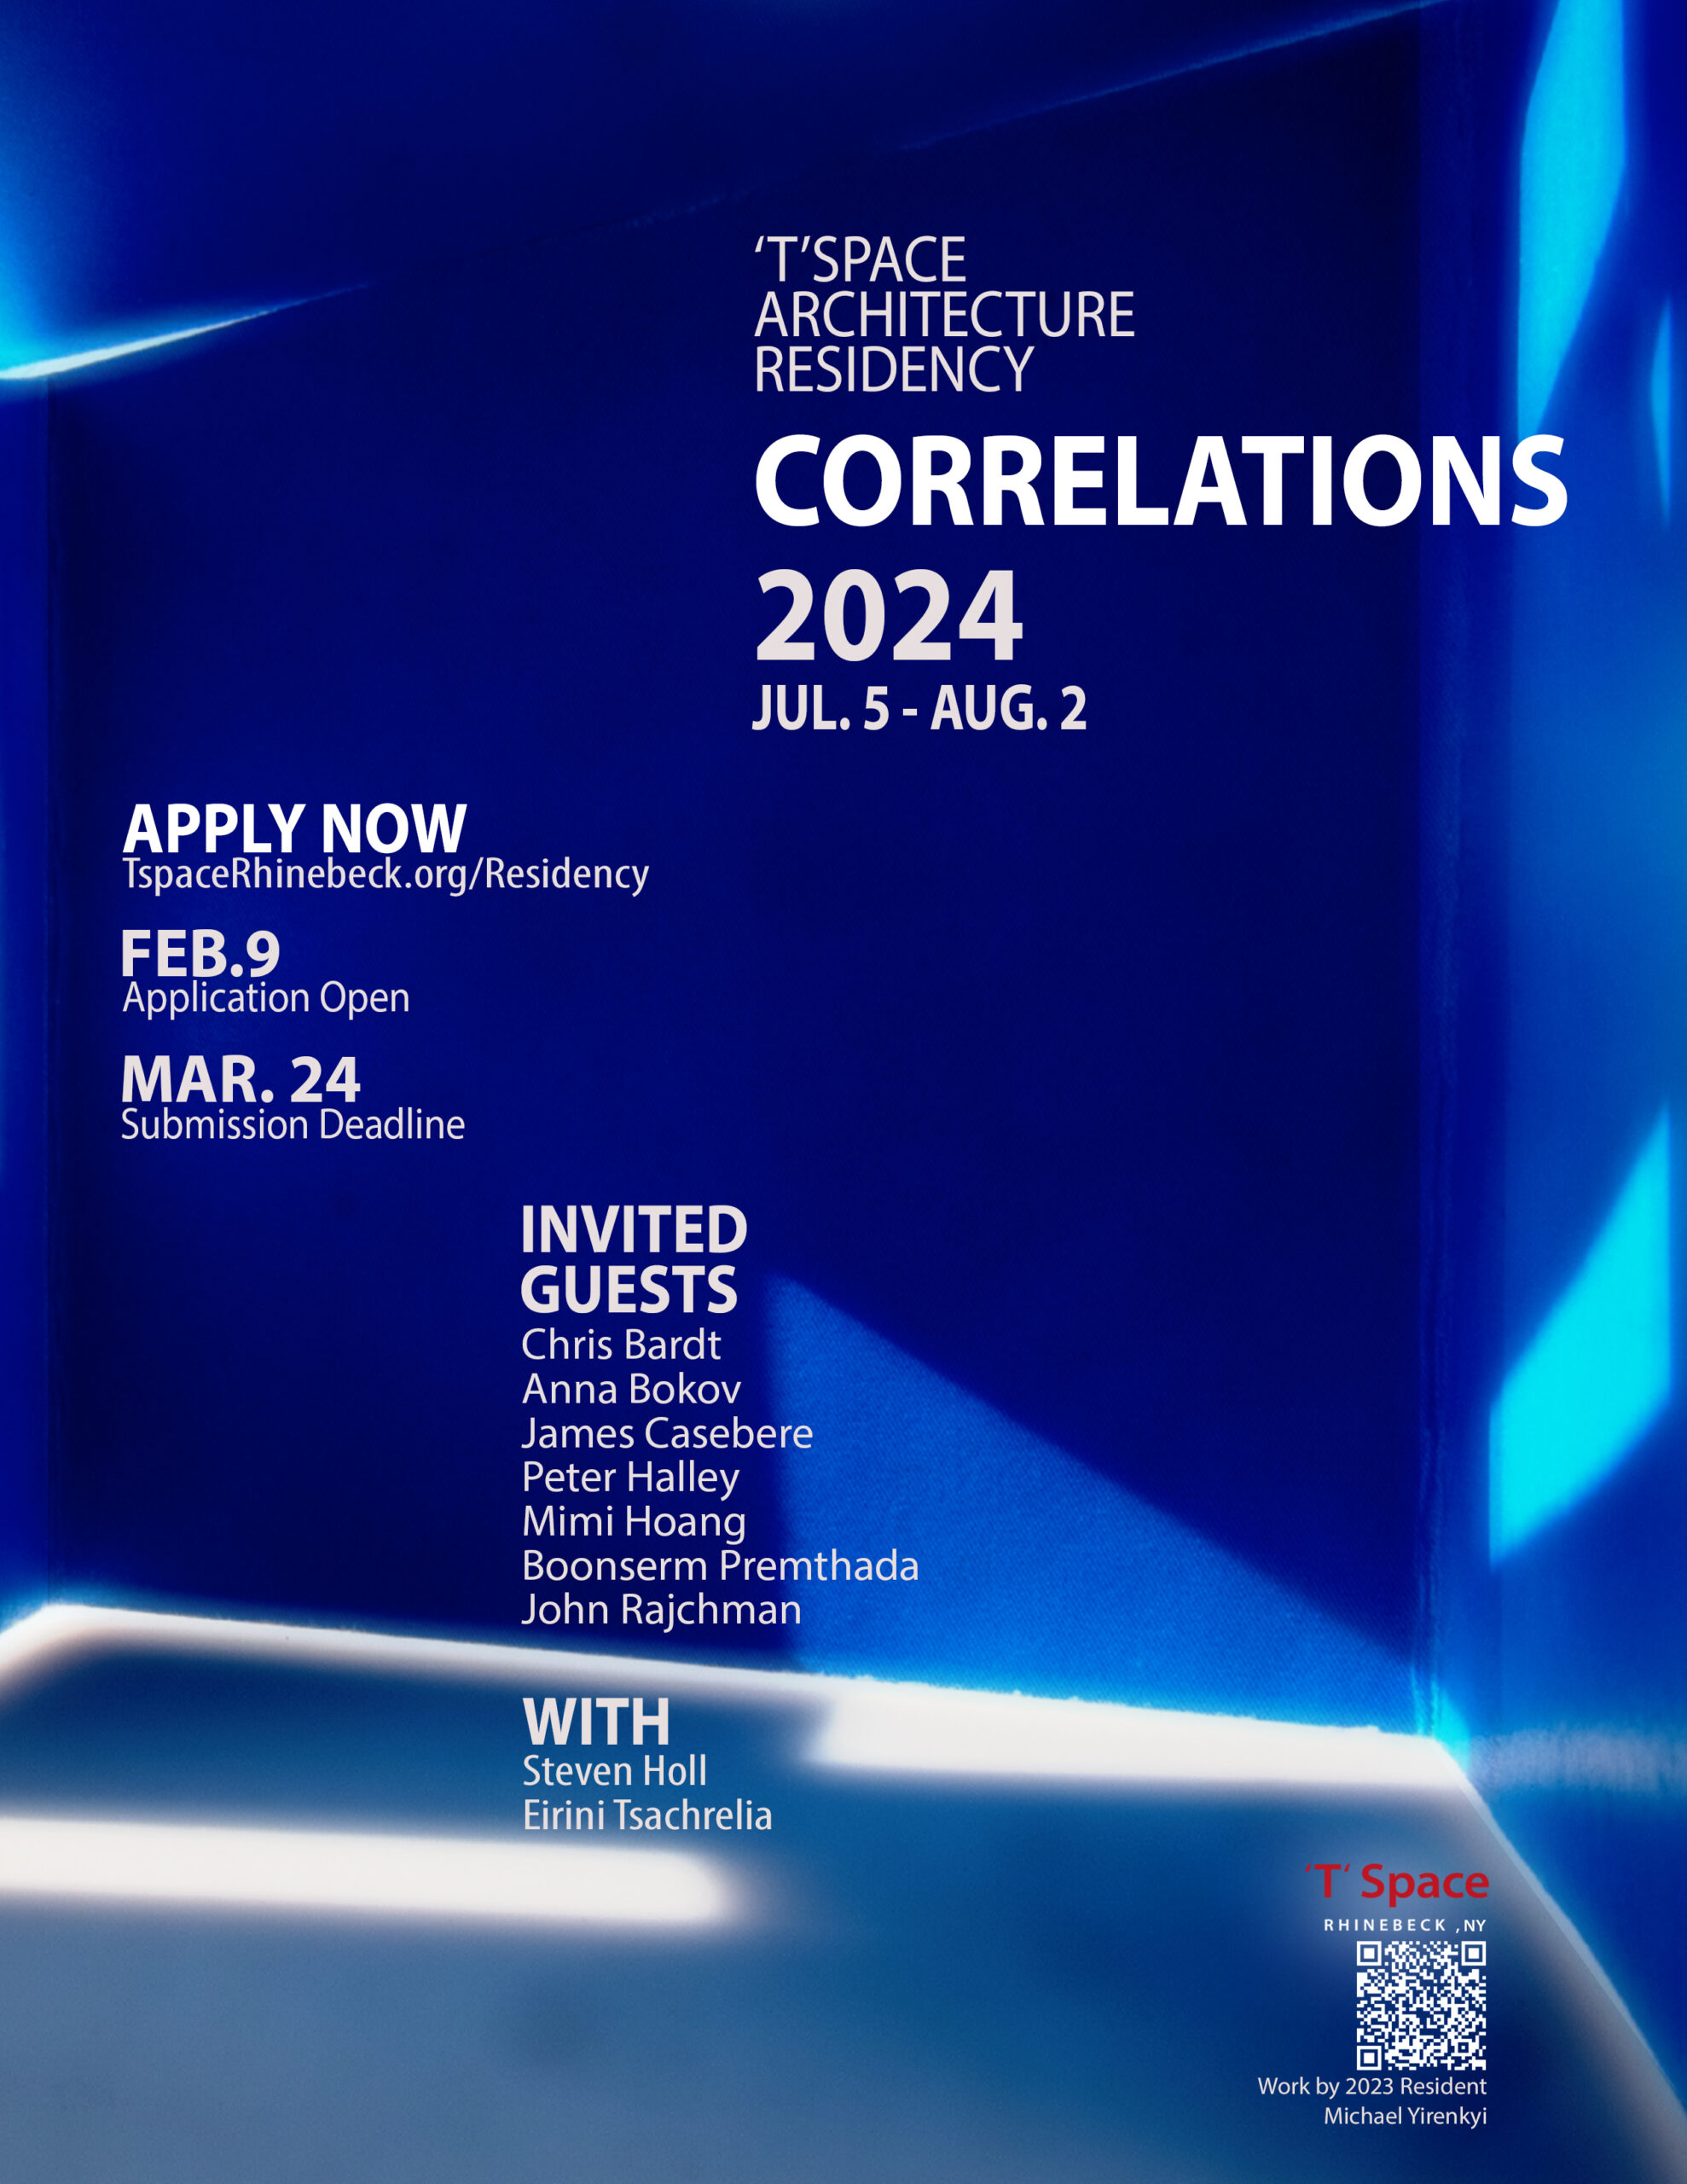 Applications Open for 2024 Architecture Residency Program: “Correlations”